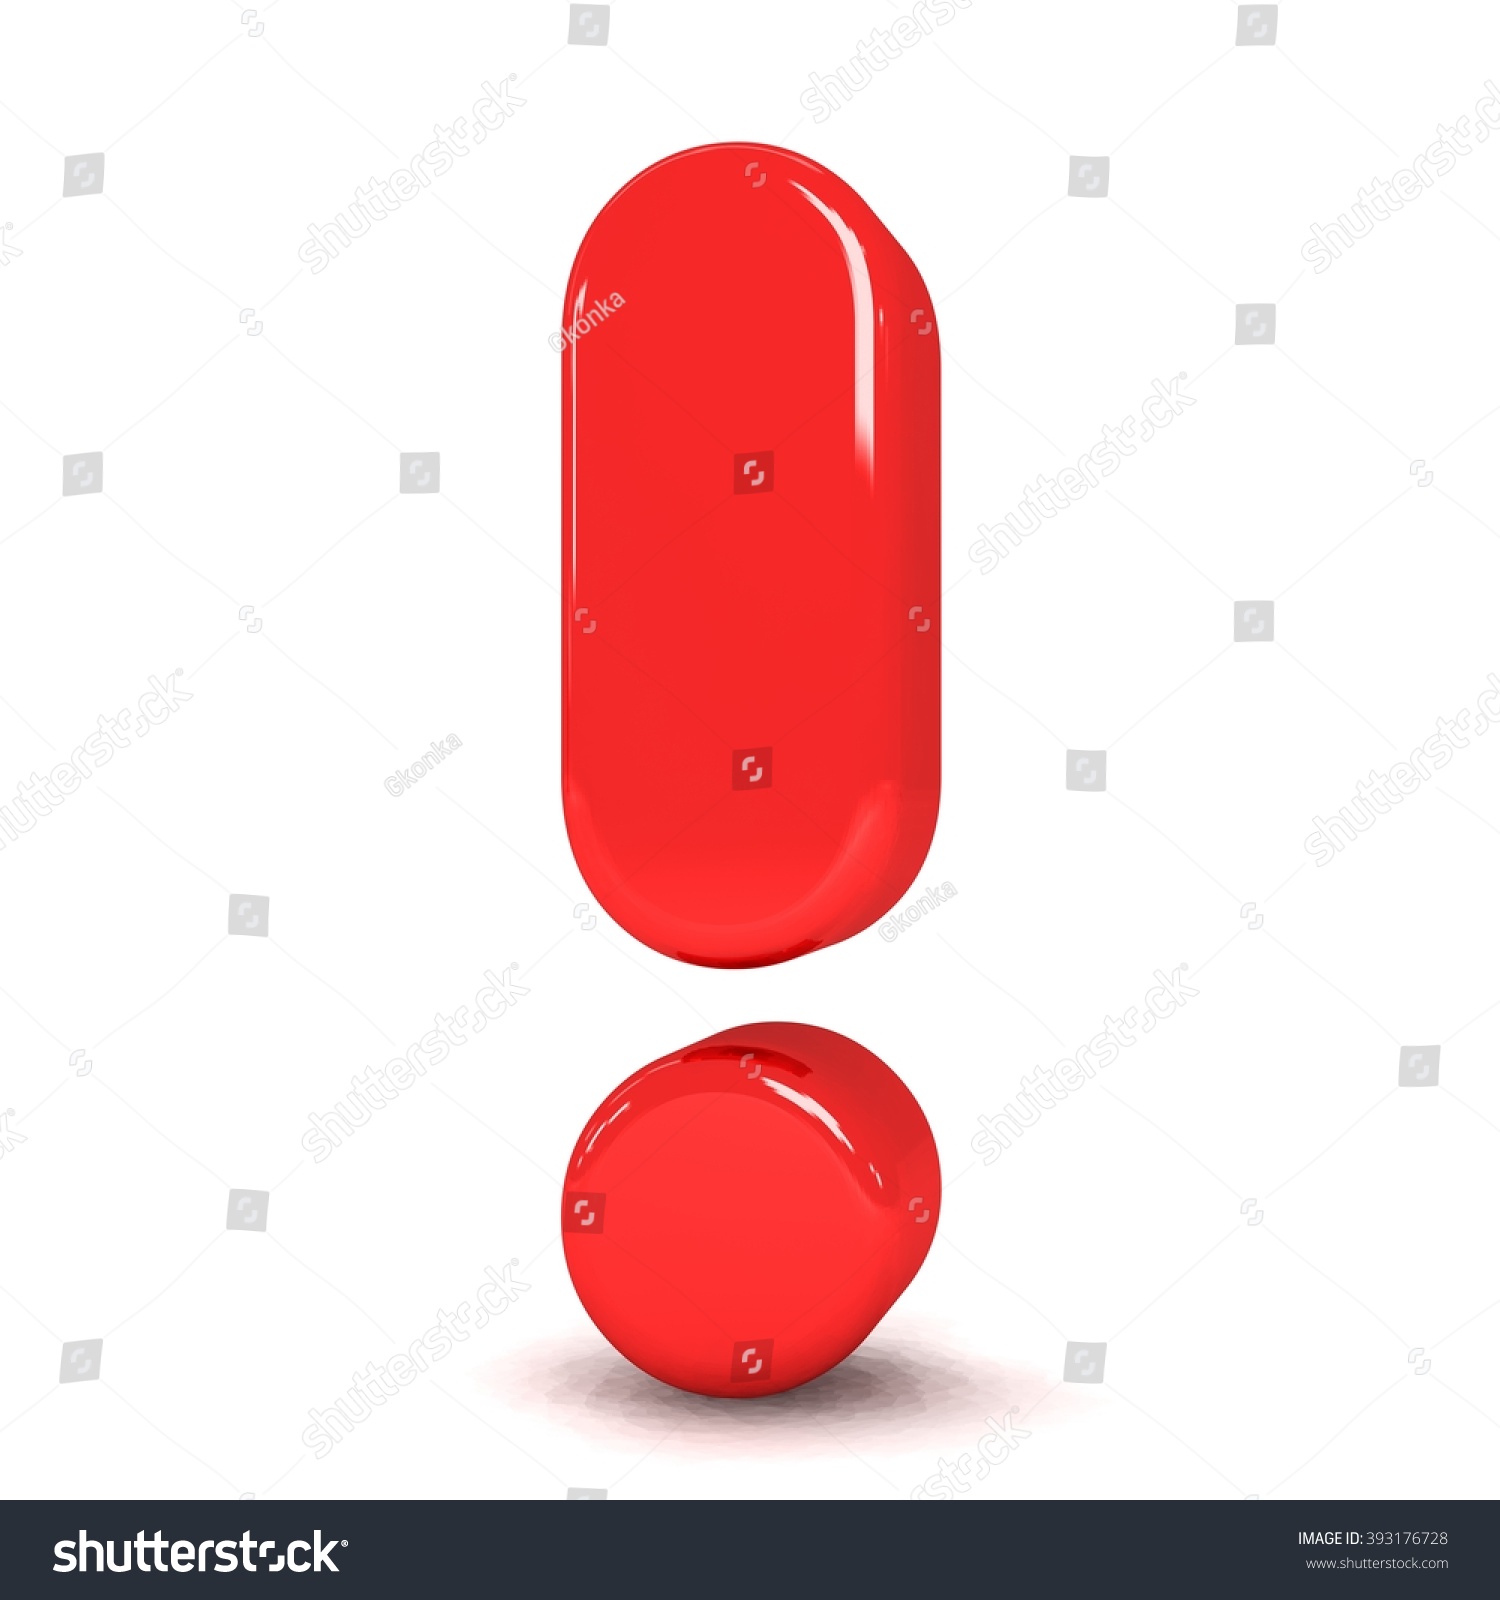 3 D Cute Red Metallic Exclamation Mark Stock Illustration 393176728